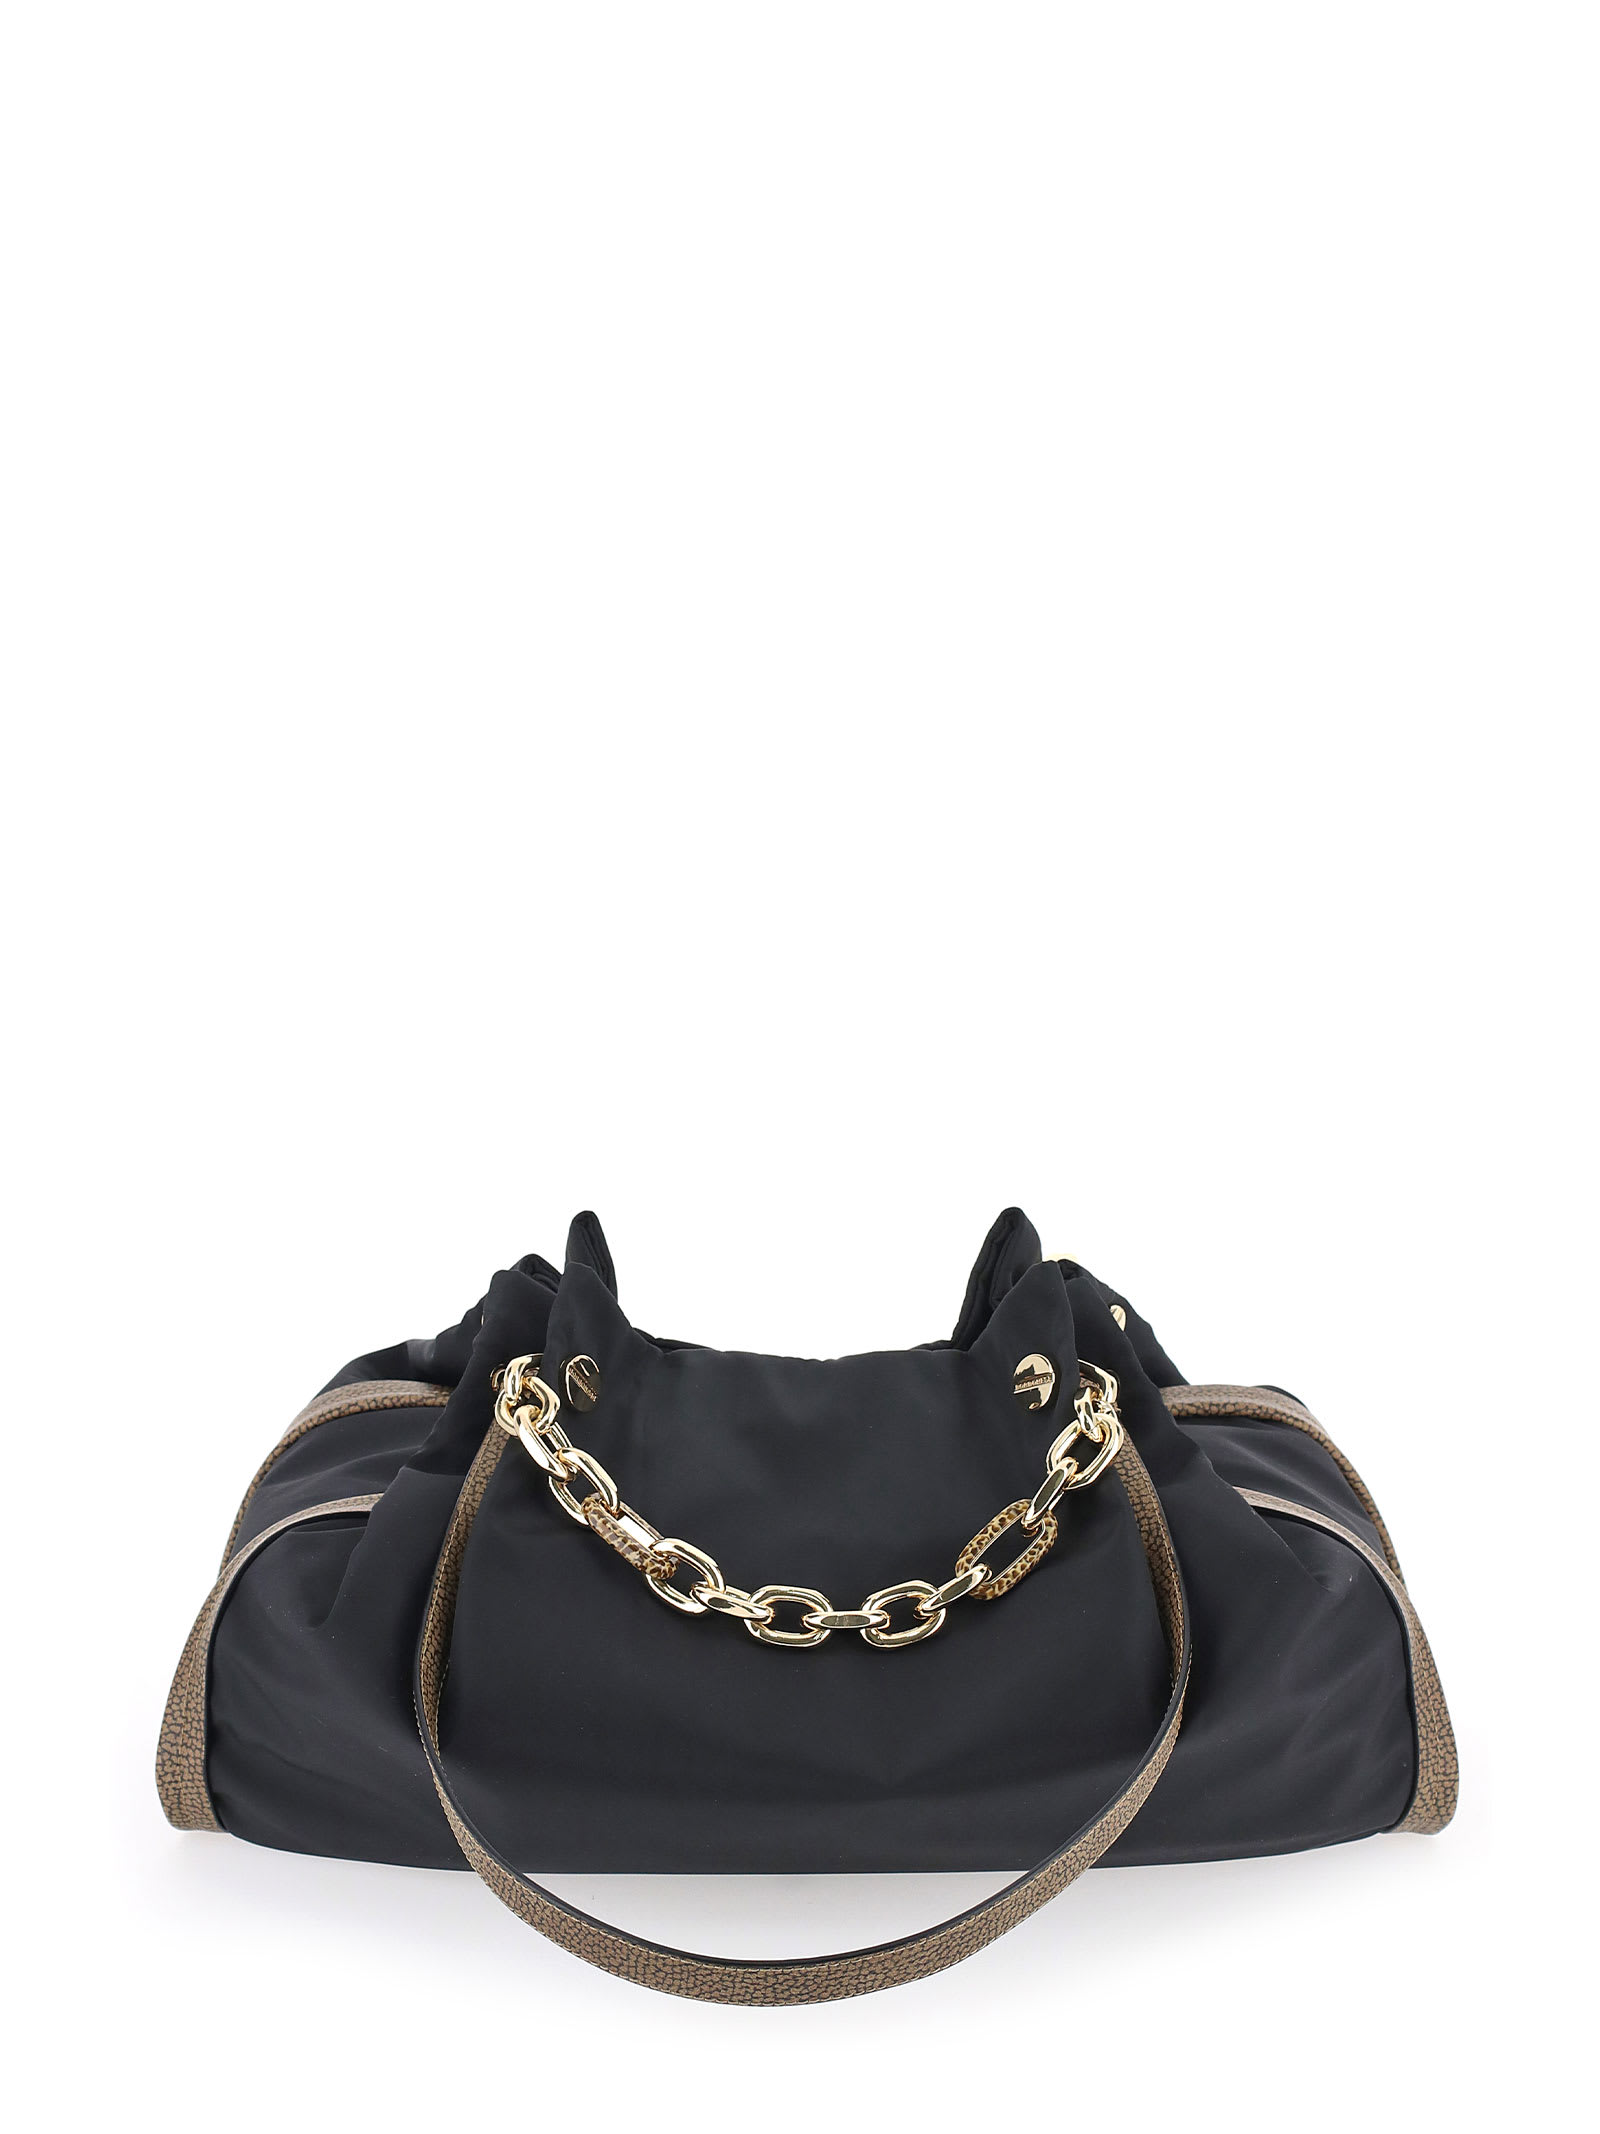 Borbonese Shopping Bag With Chain